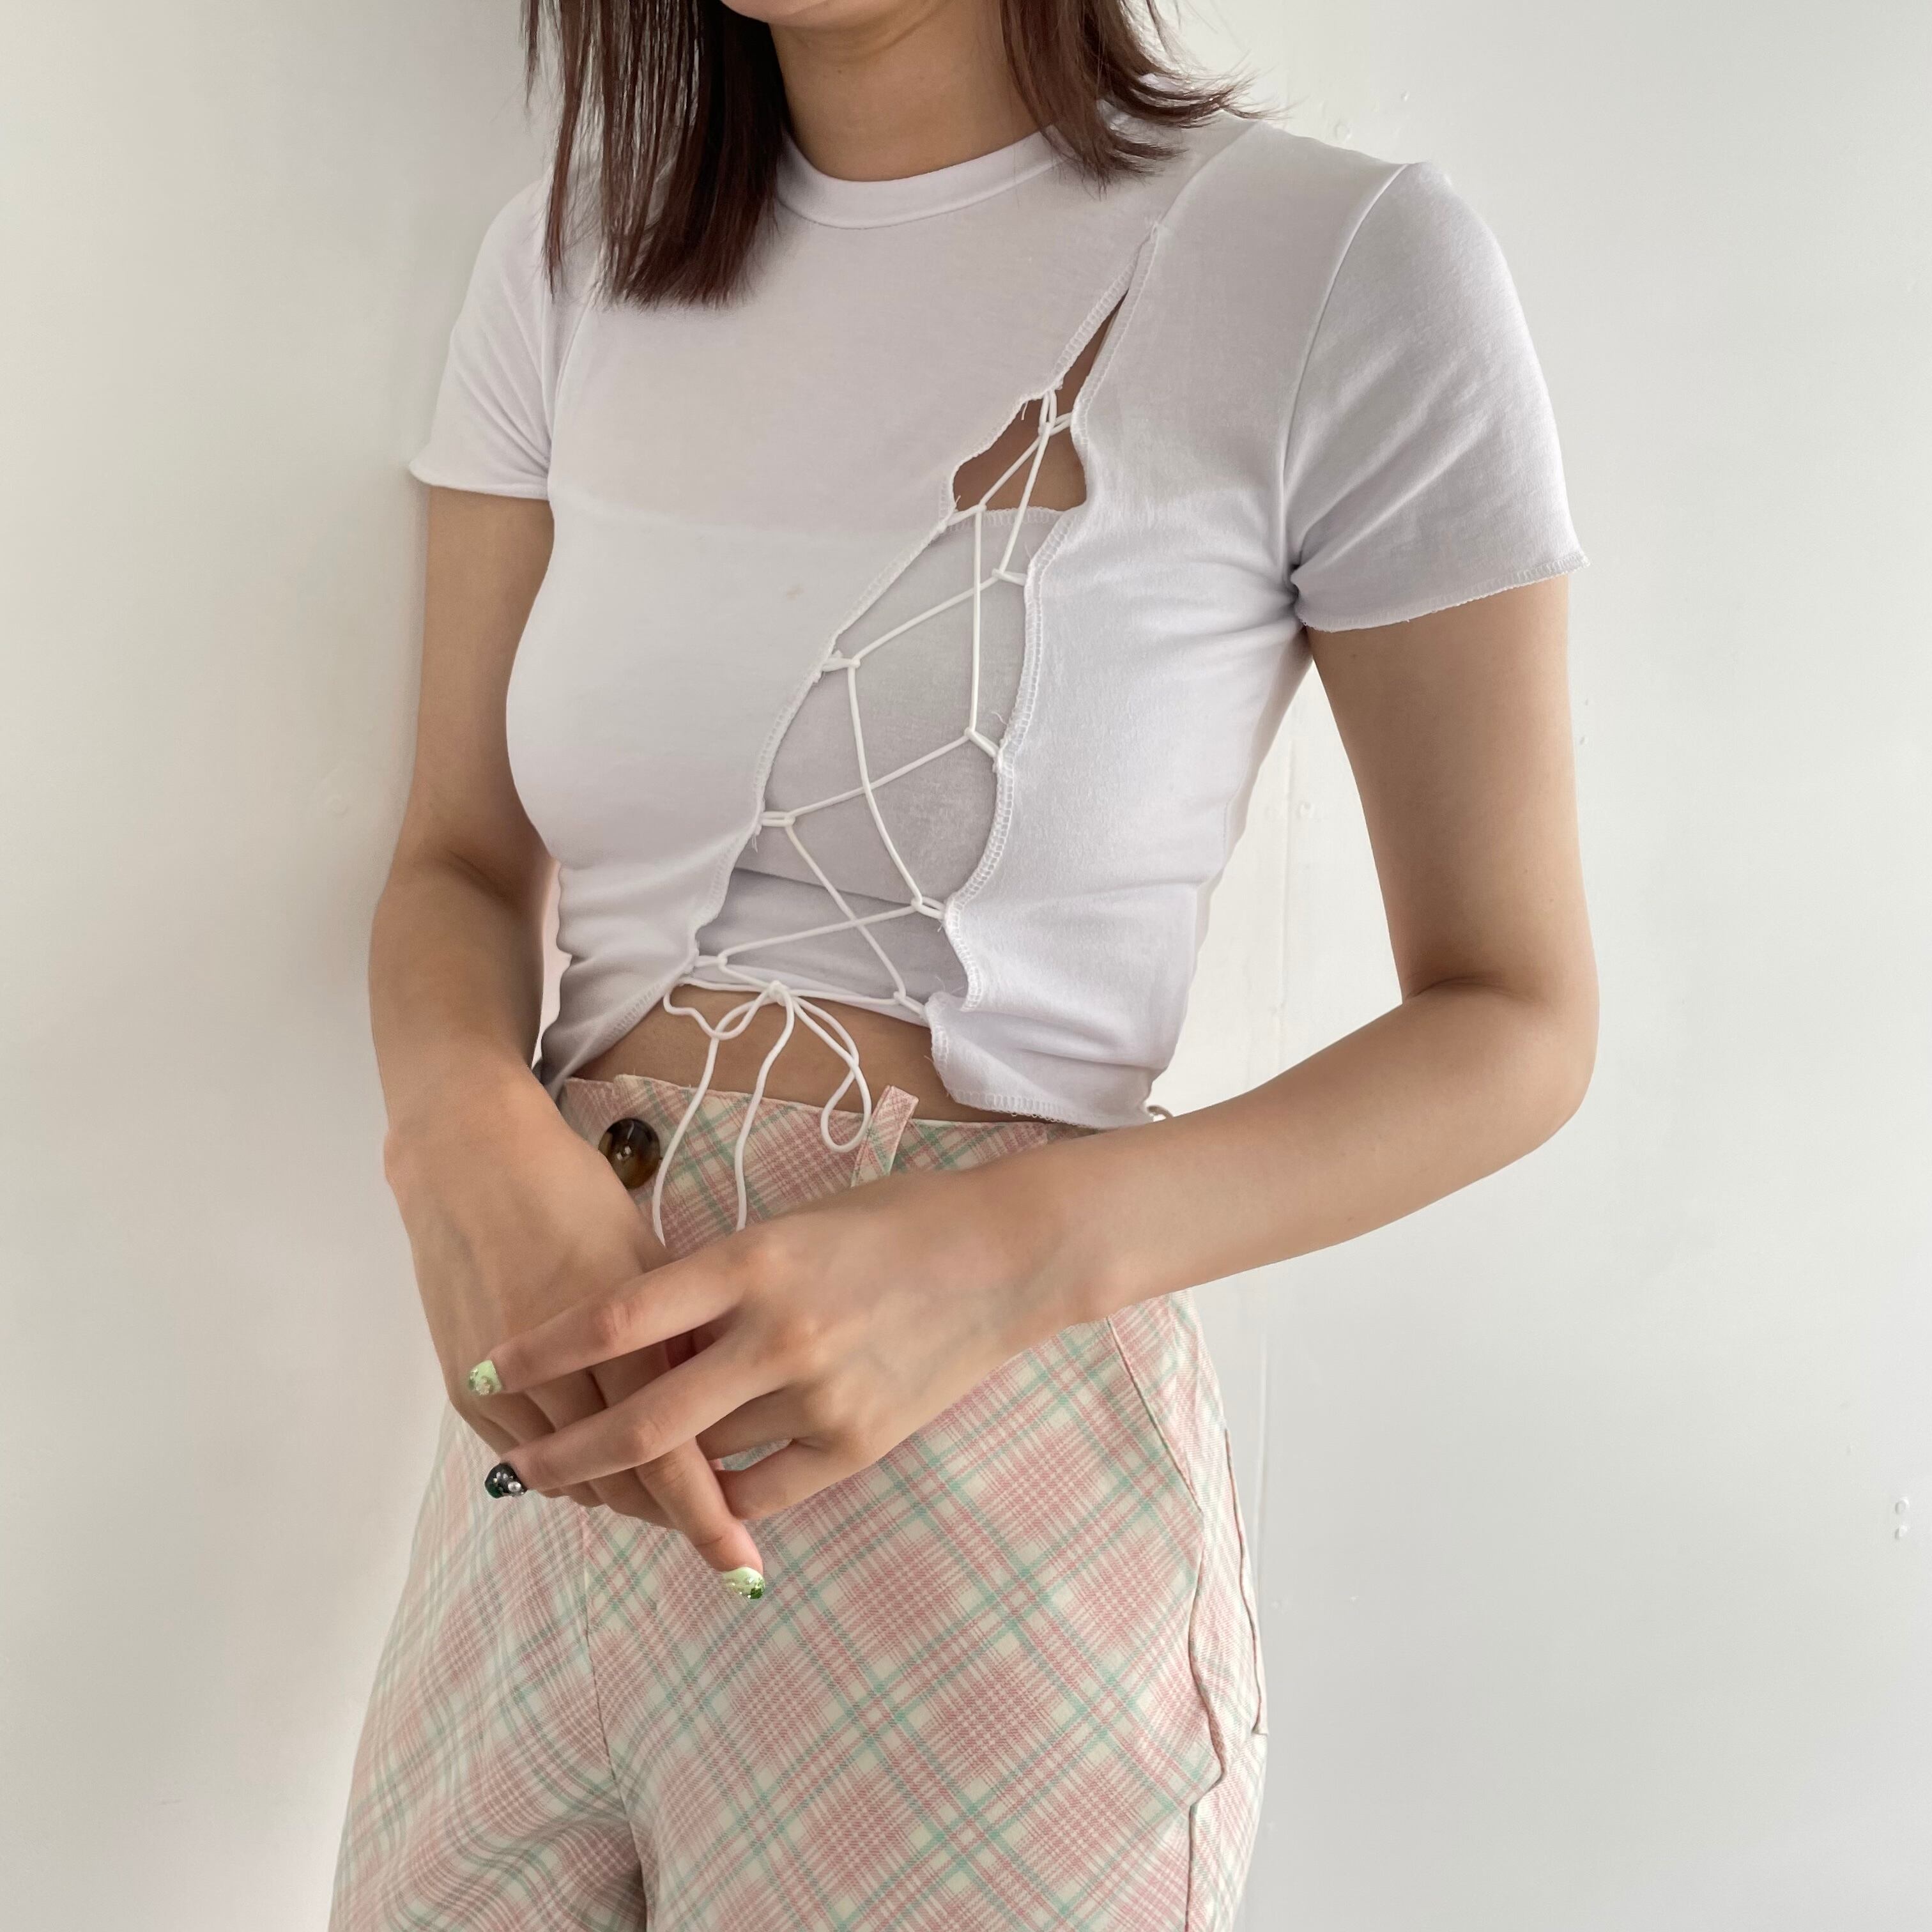 【Belle】lace up tops / white